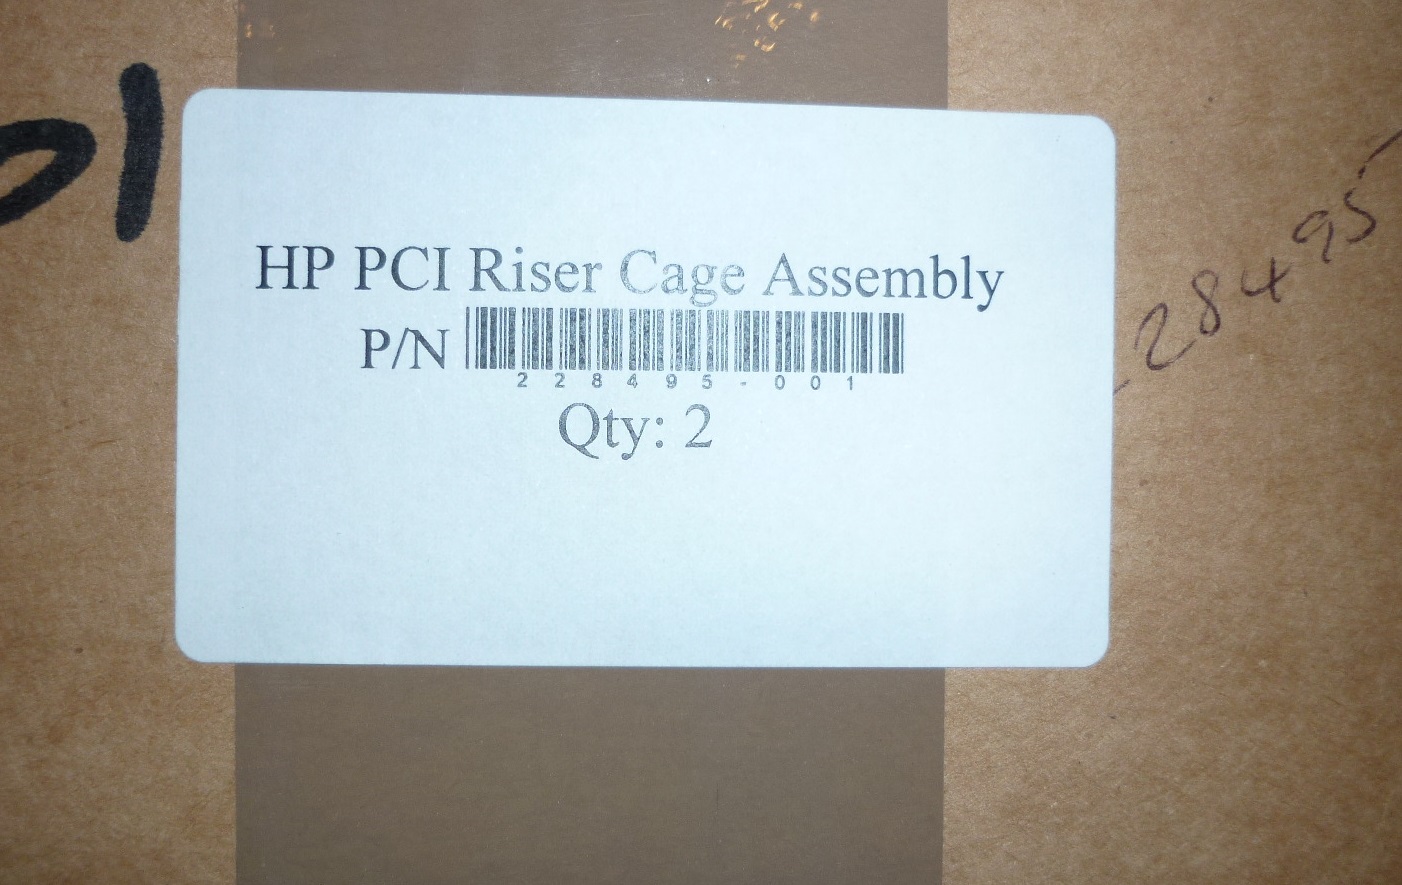 228495-001 - HP PCI RISER CAGE WITH CARD PCI-X